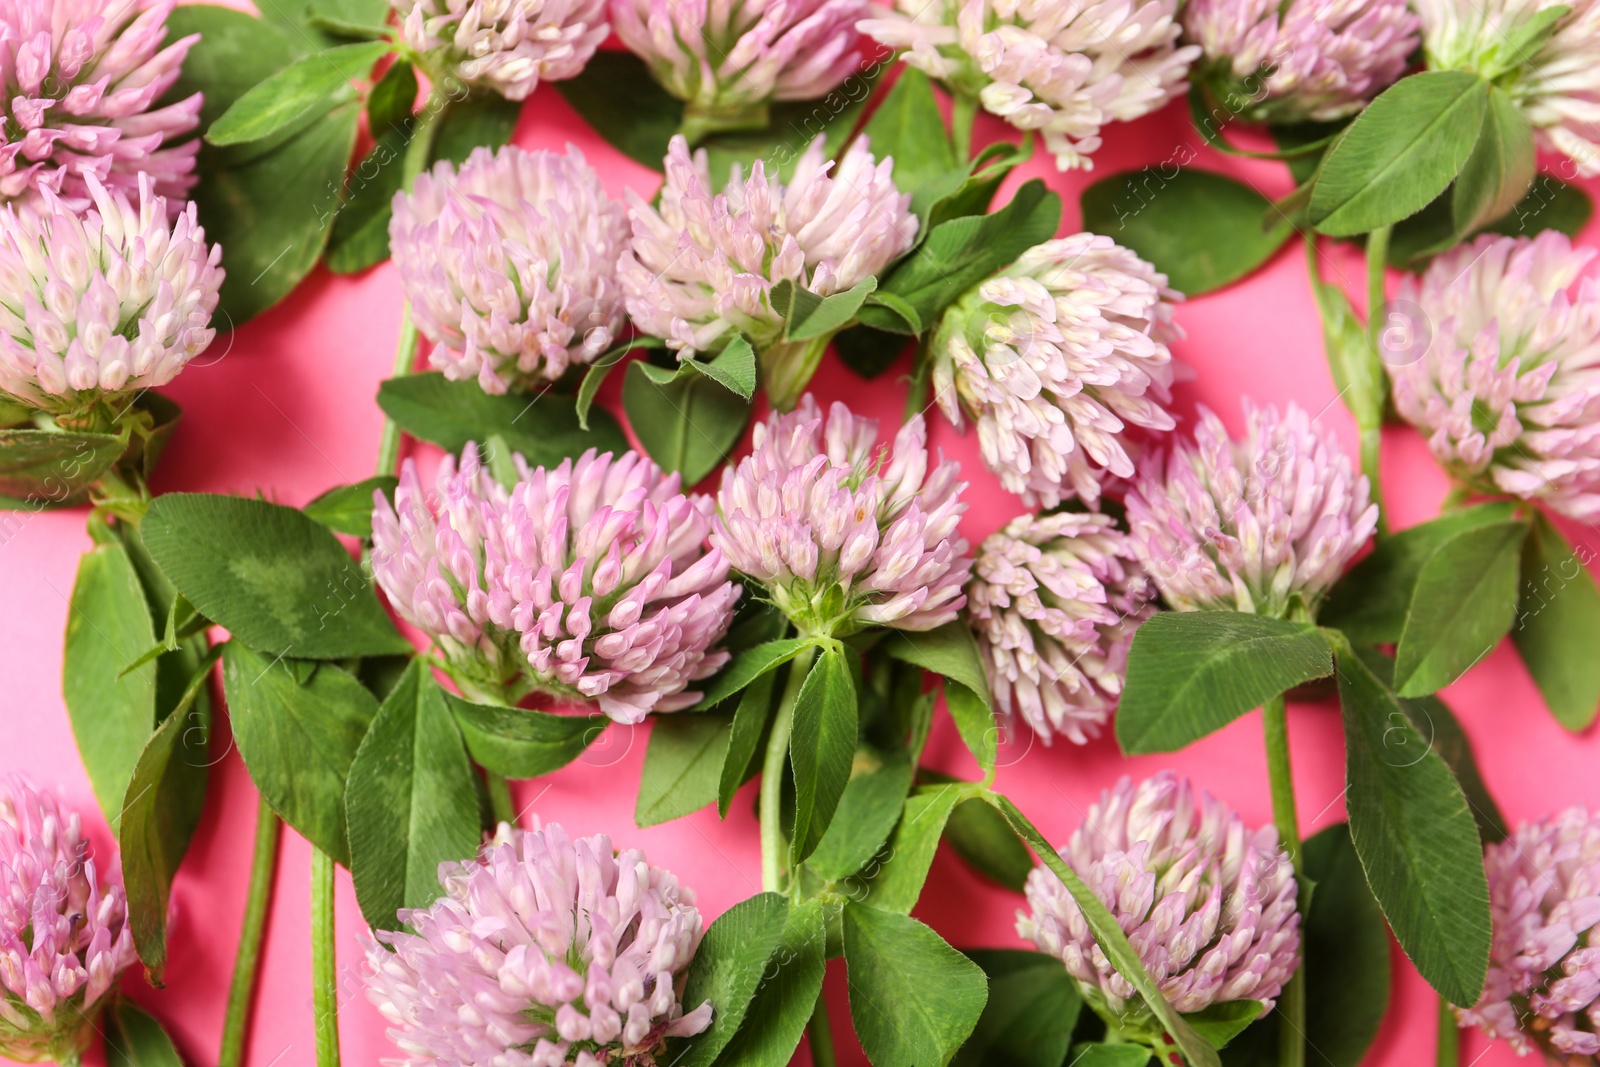 Photo of Beautiful clover flowers on pink background, flat lay